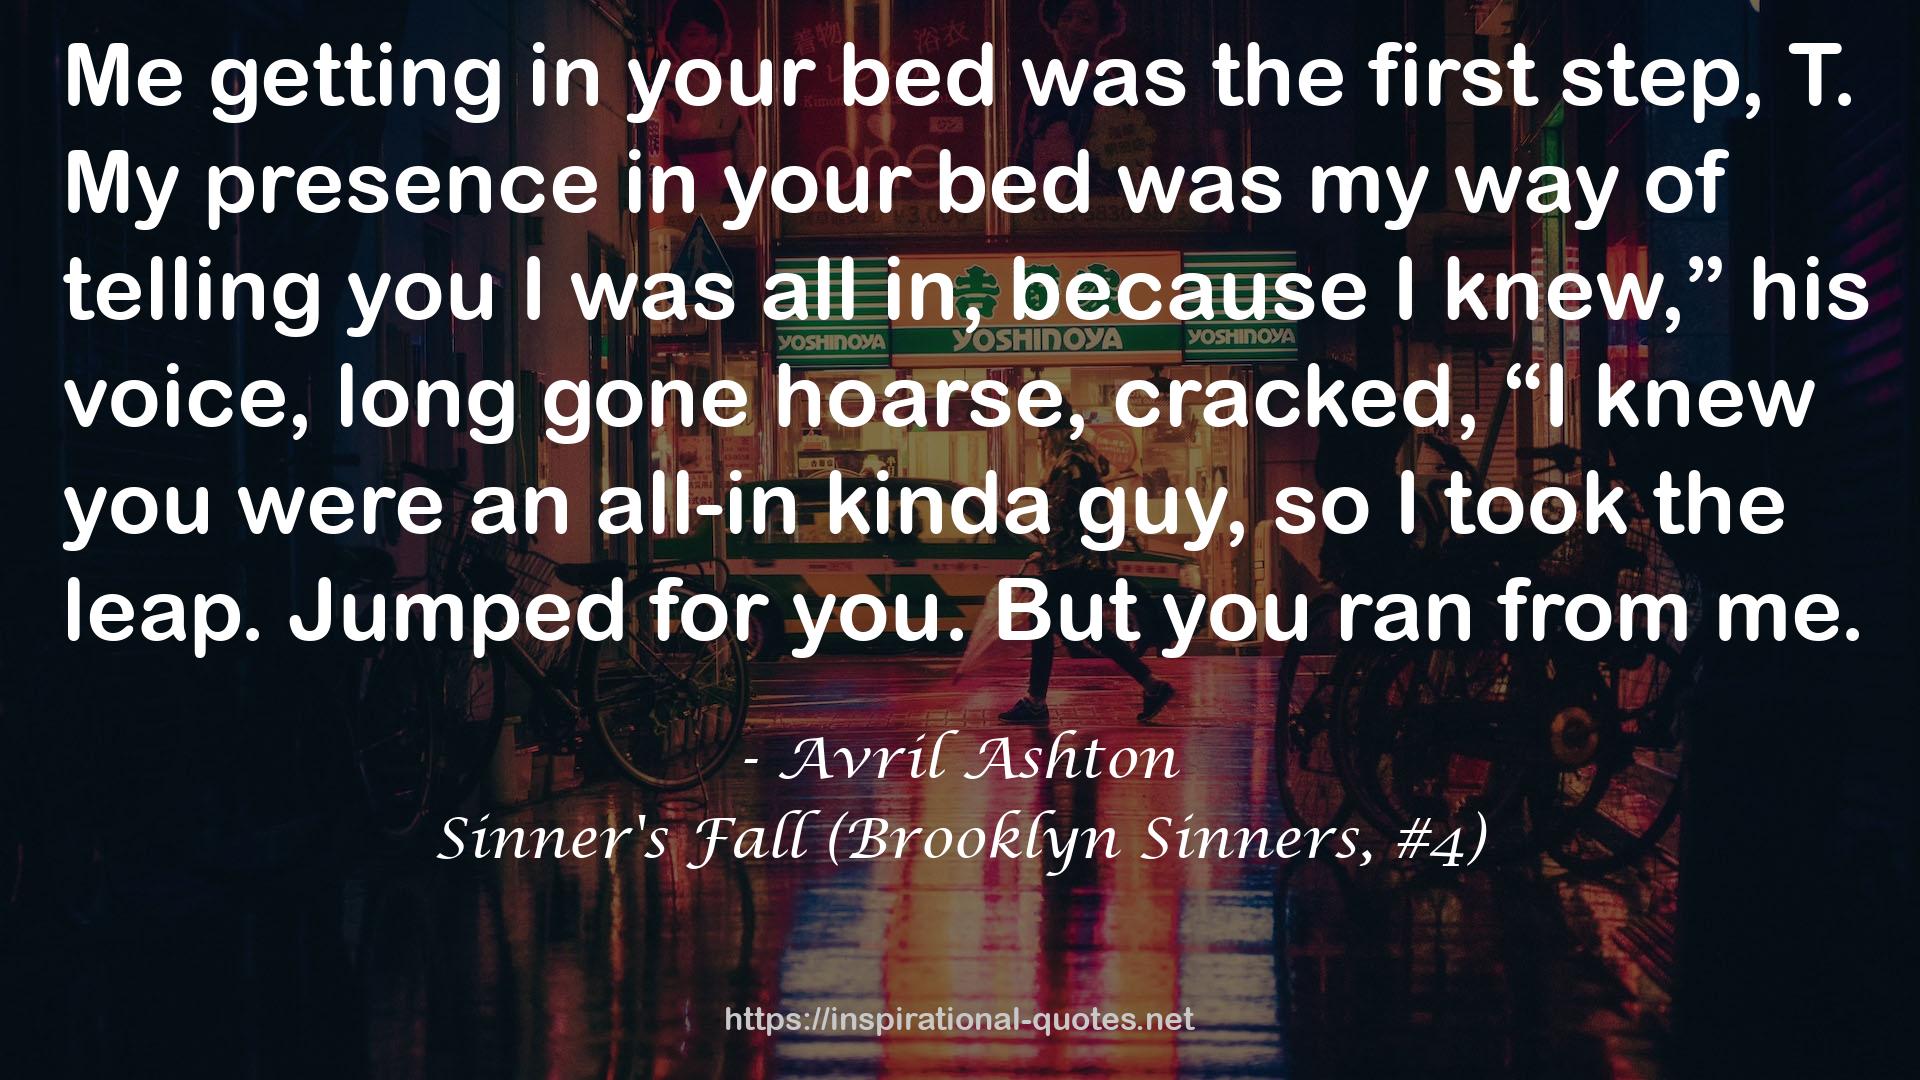 Sinner's Fall (Brooklyn Sinners, #4) QUOTES